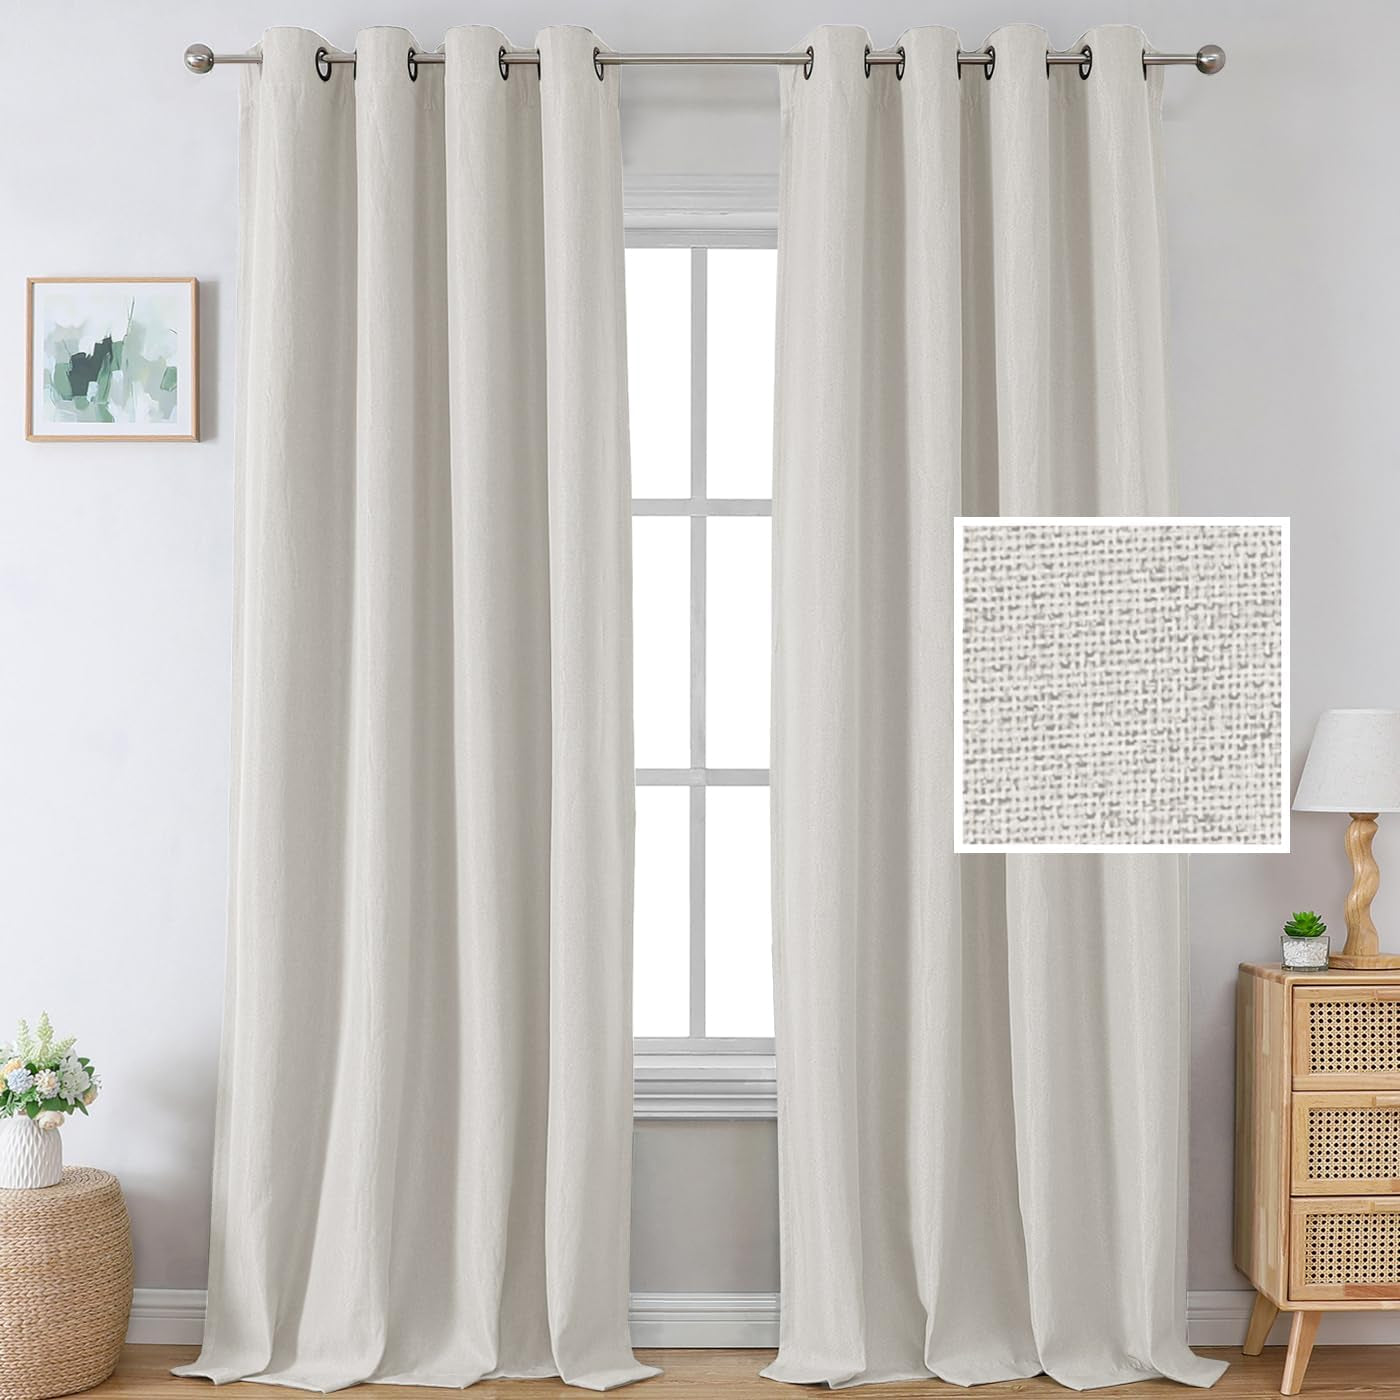 H.VERSAILTEX Linen Blackout Curtains 84 Inches Long Thermal Insulated Room Darkening Linen Curtains for Bedroom Textured Burlap Grommet Window Curtains for Living Room, Bluestone and Taupe, 2 Panels  H.VERSAILTEX Natural 52"W X 96"L 